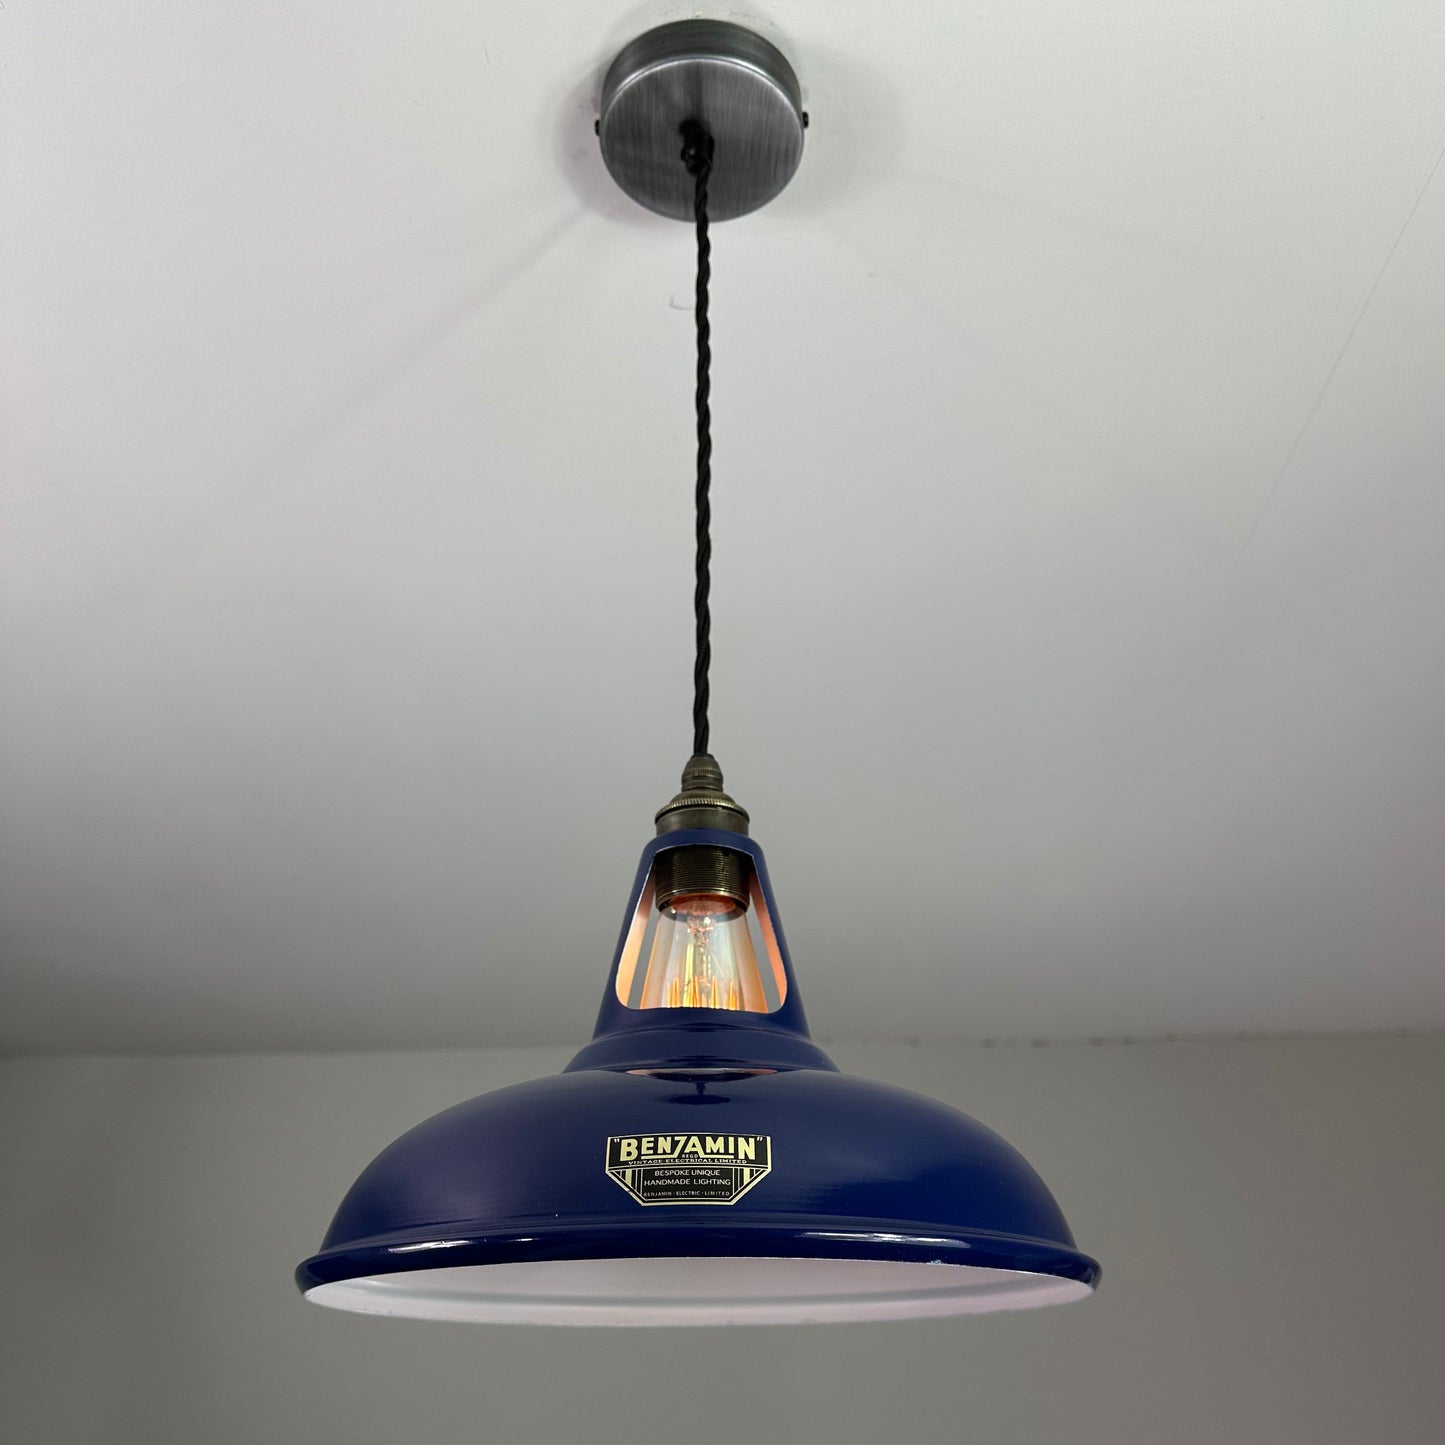 Cawston ~ *Worn* Blue Solid Shade Slotted Design Pendant Set Light | Ceiling Dining Room | Kitchen Table | Vintage Bulb